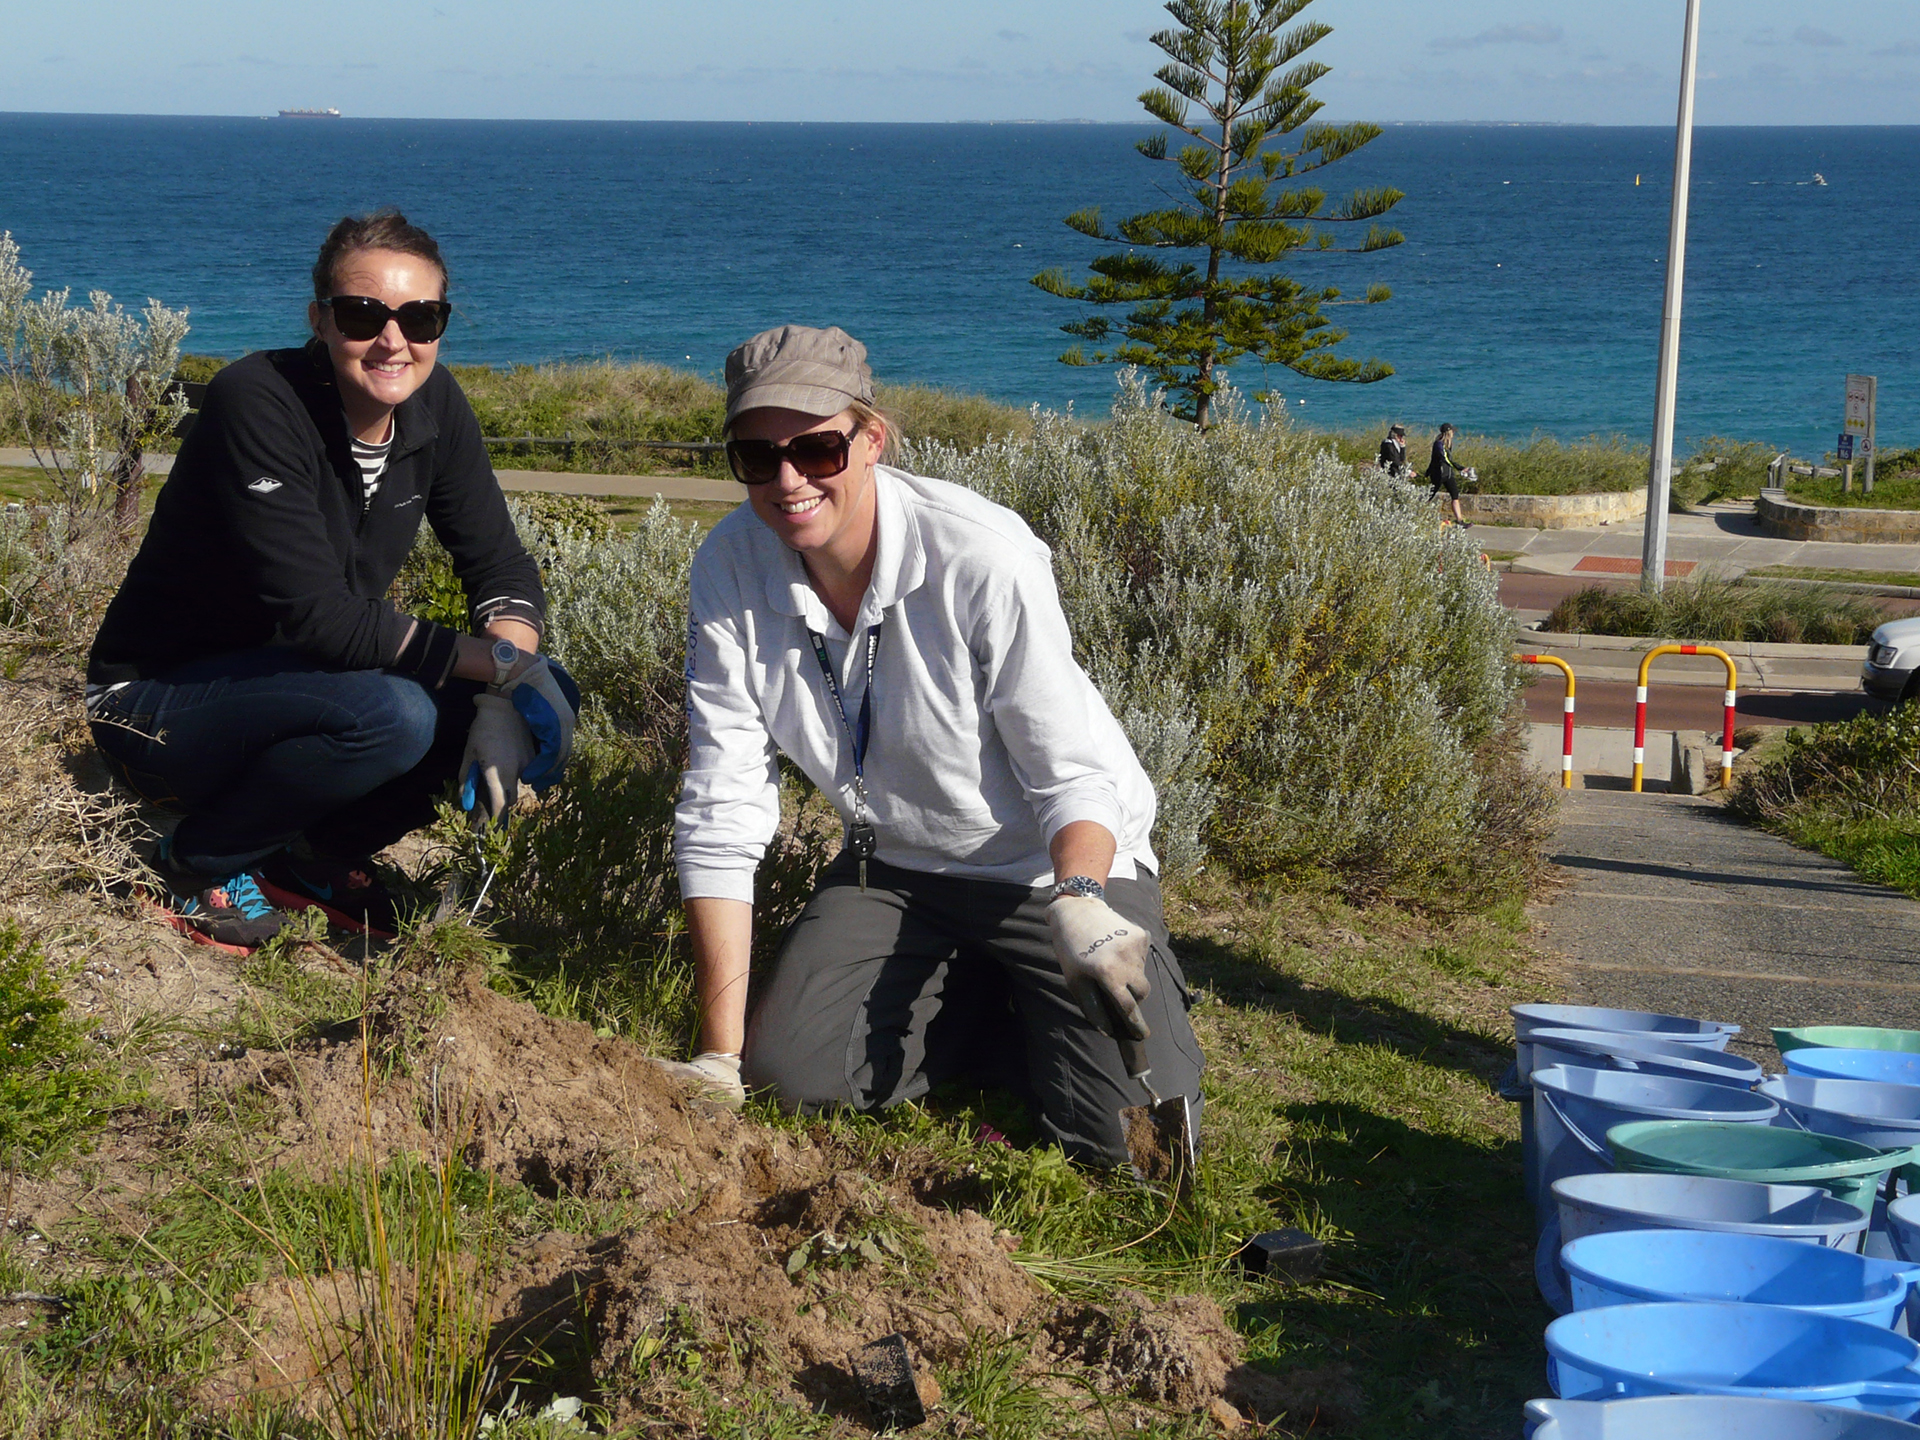 Nikki Pursell (Cottesloe’s Sustainability Officer) and Kate planting on the dunes